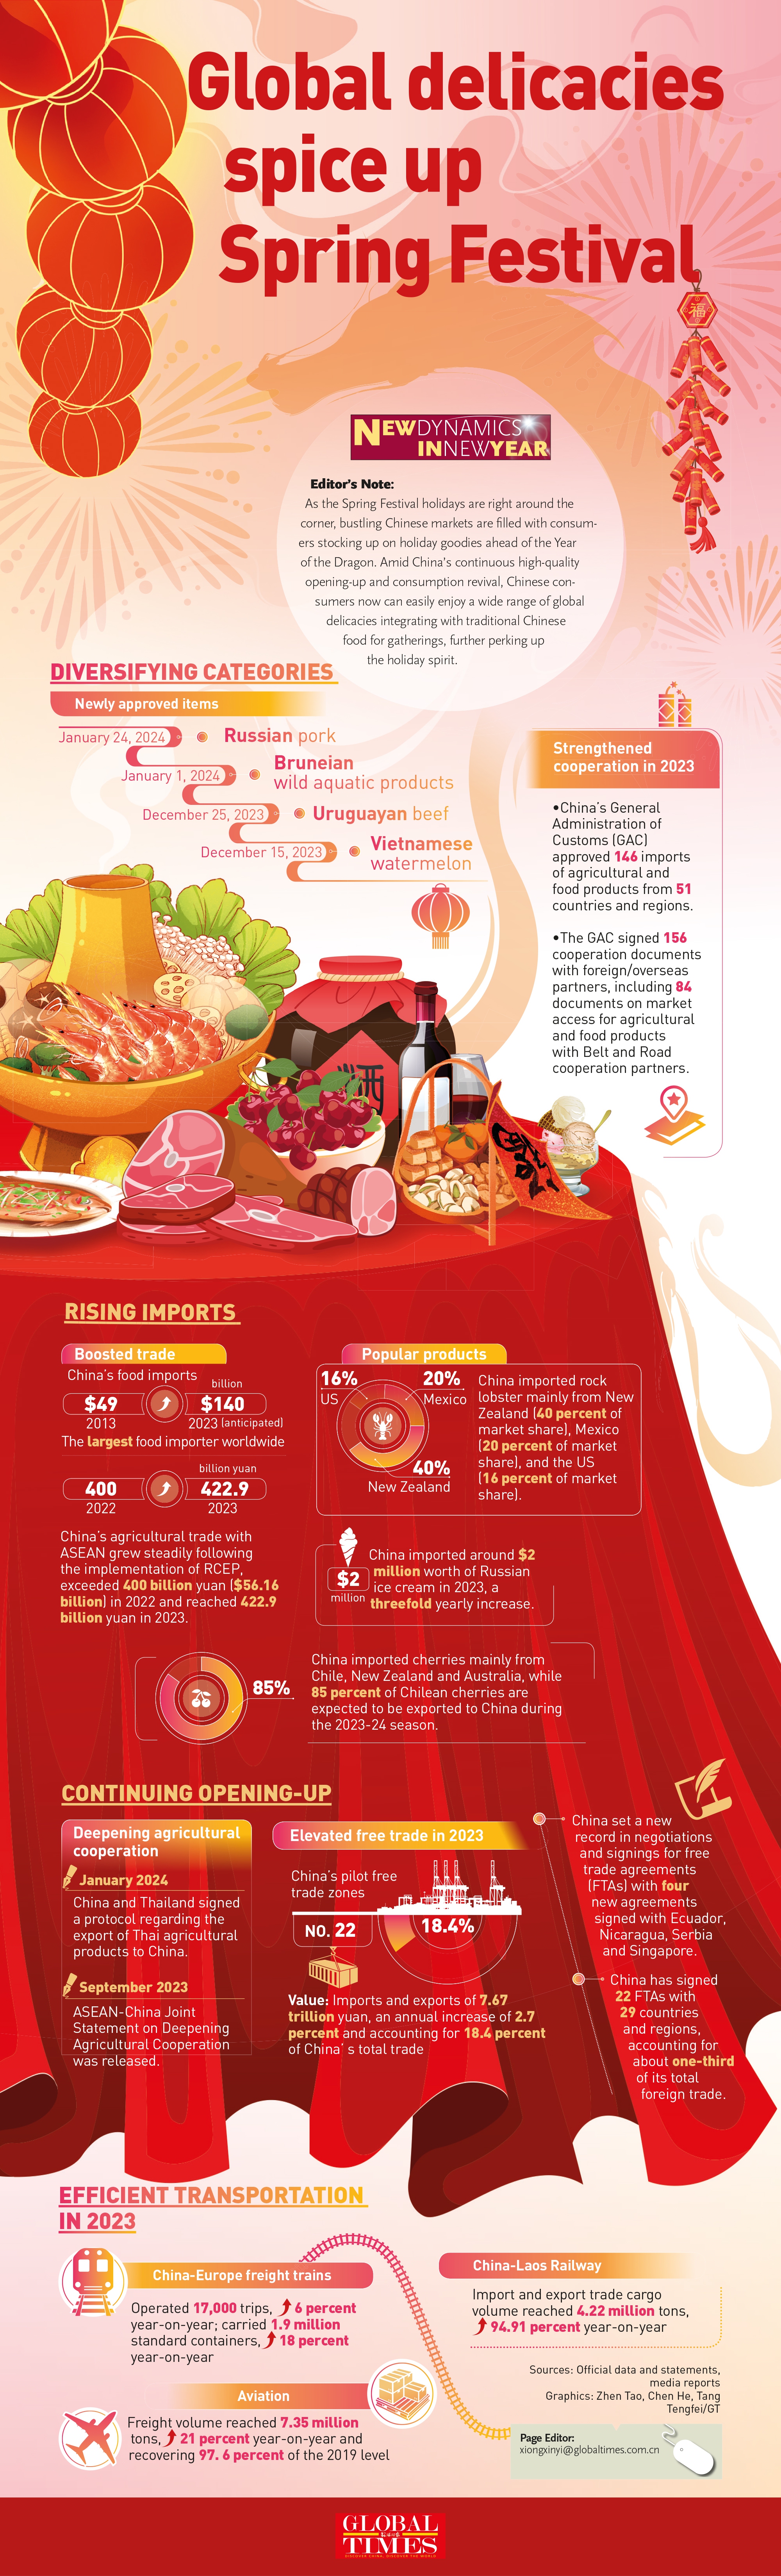 GraphicAnalyasis: Global delicacies spice up Spring Festival amid holiday consumption boom:GT